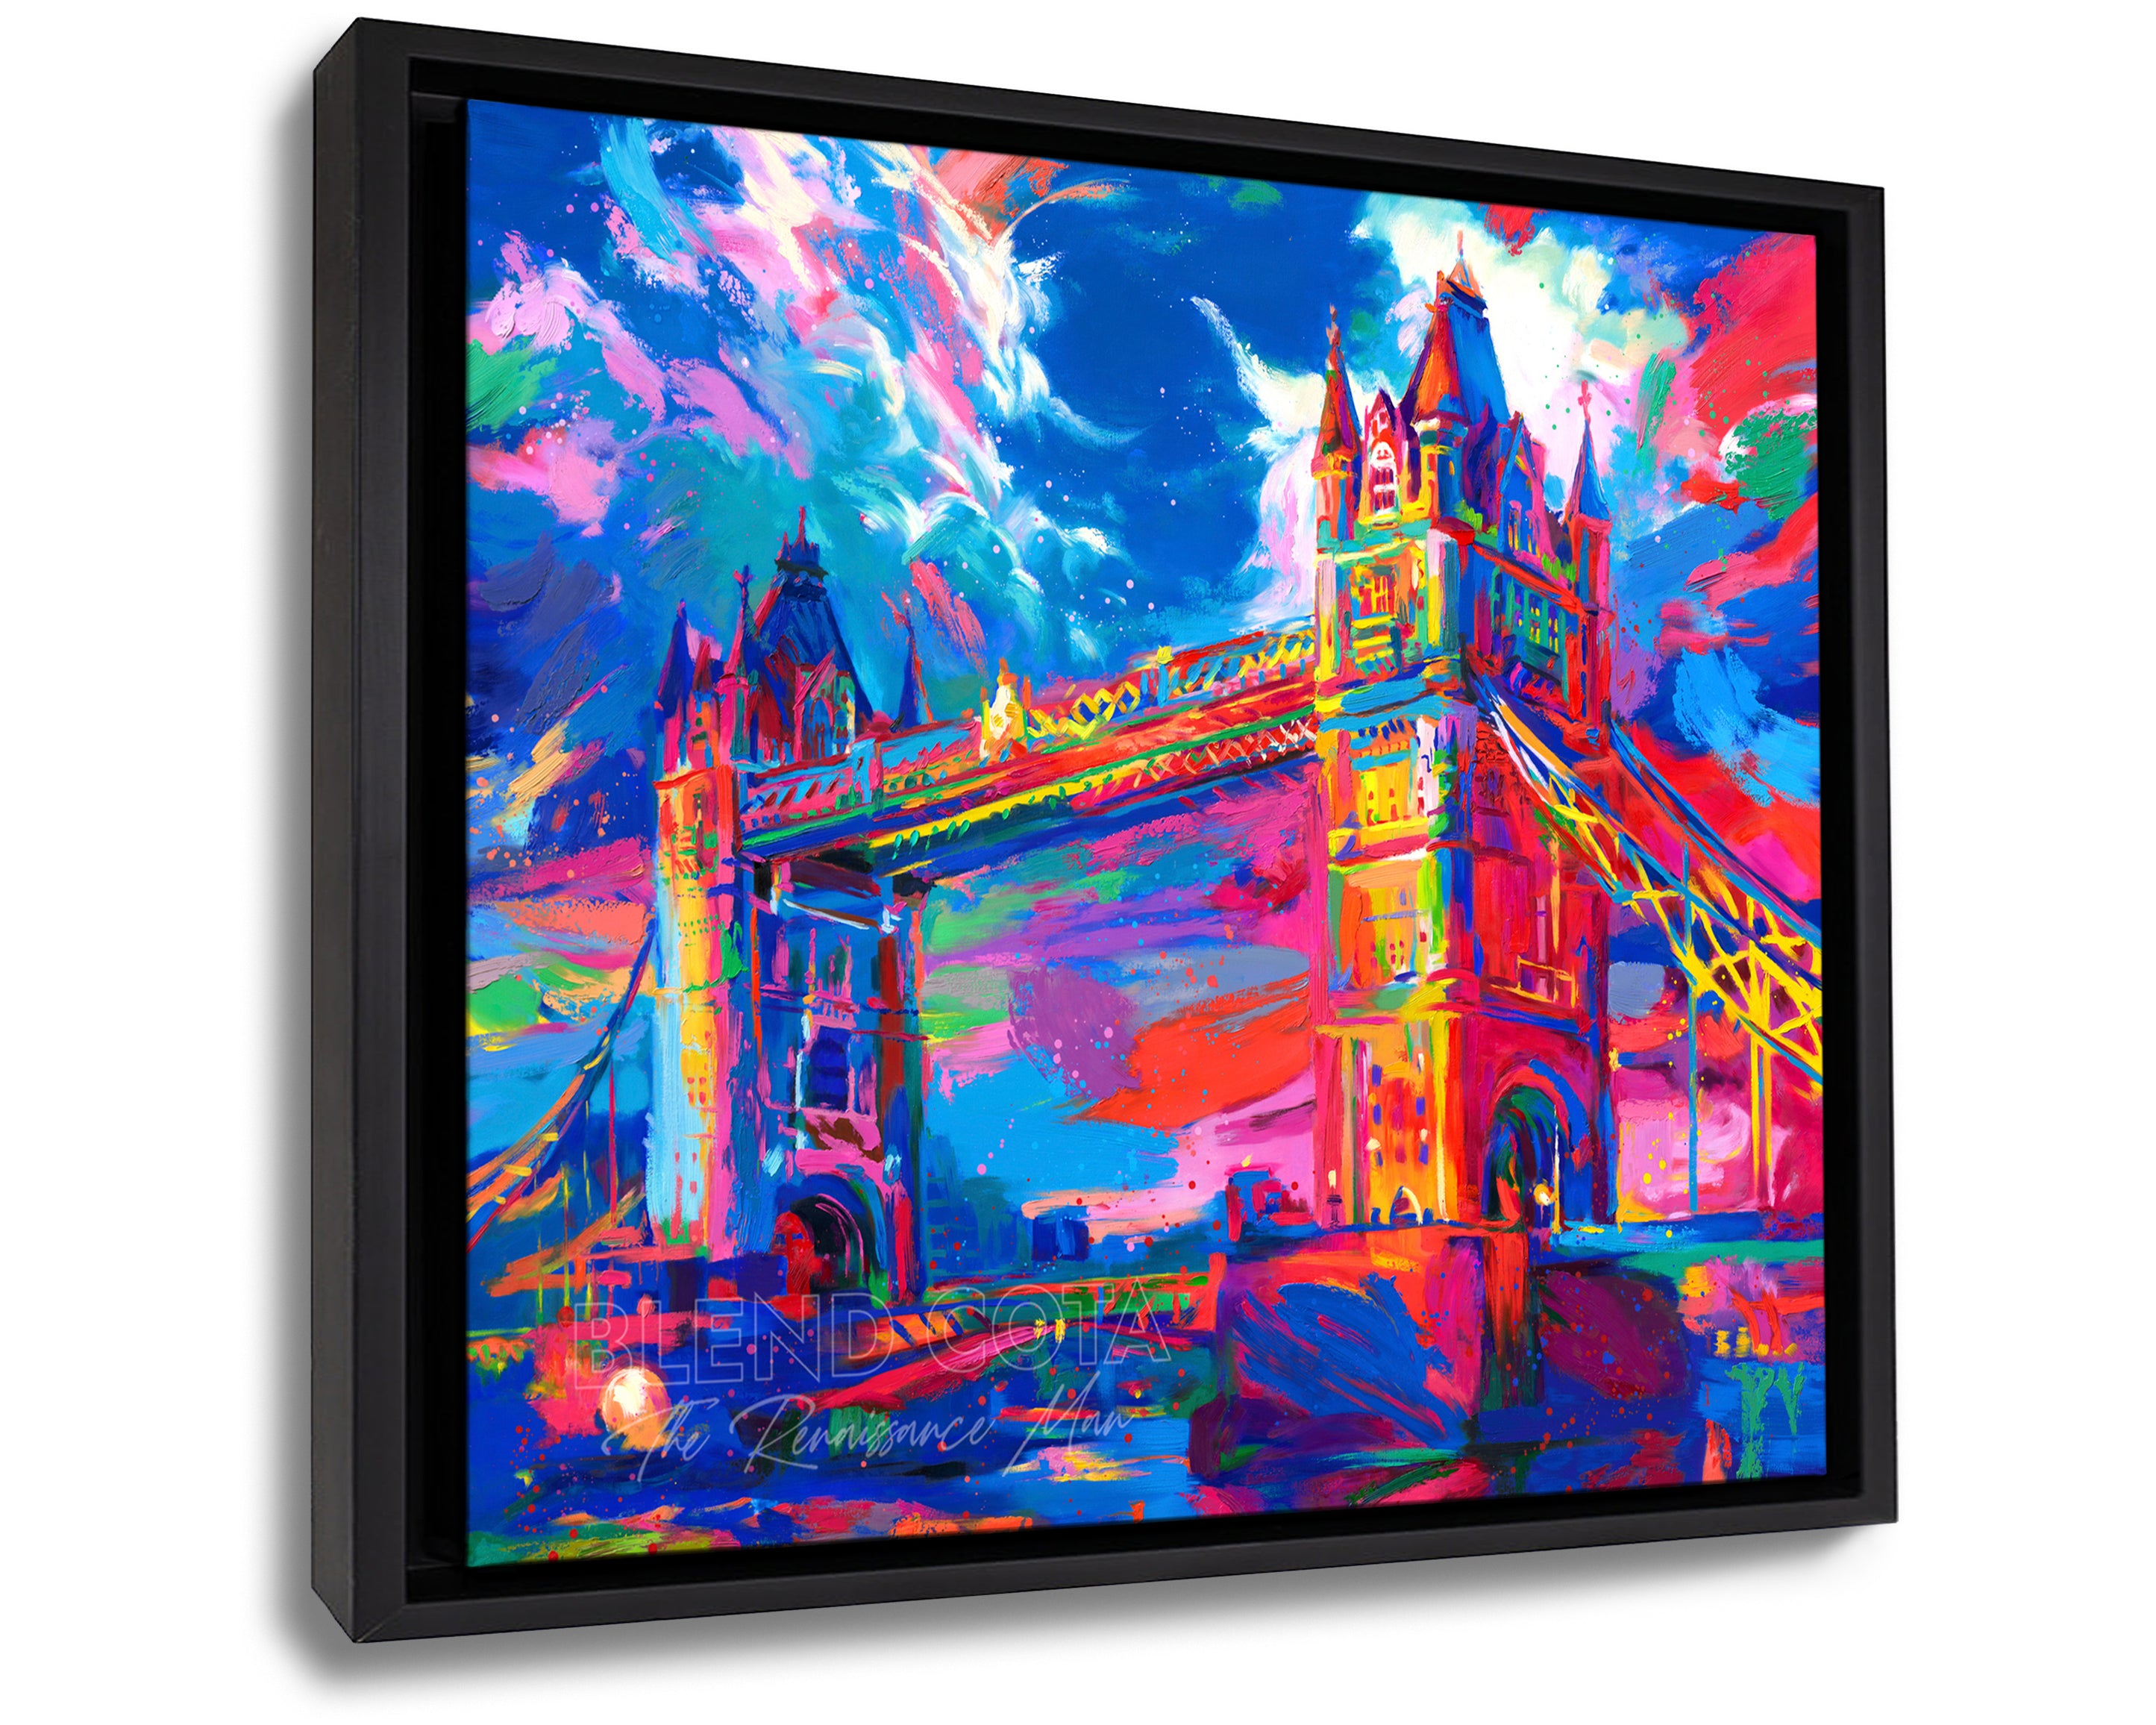 Framed art print on canvas of the London Tower Bridge in United Kingdom, seen below from the Thames, displaying masterful engineering and architecture of Victorian Gothic style, and symbol of strength and beauty, in colorful brushstrokes, color expressionism style.